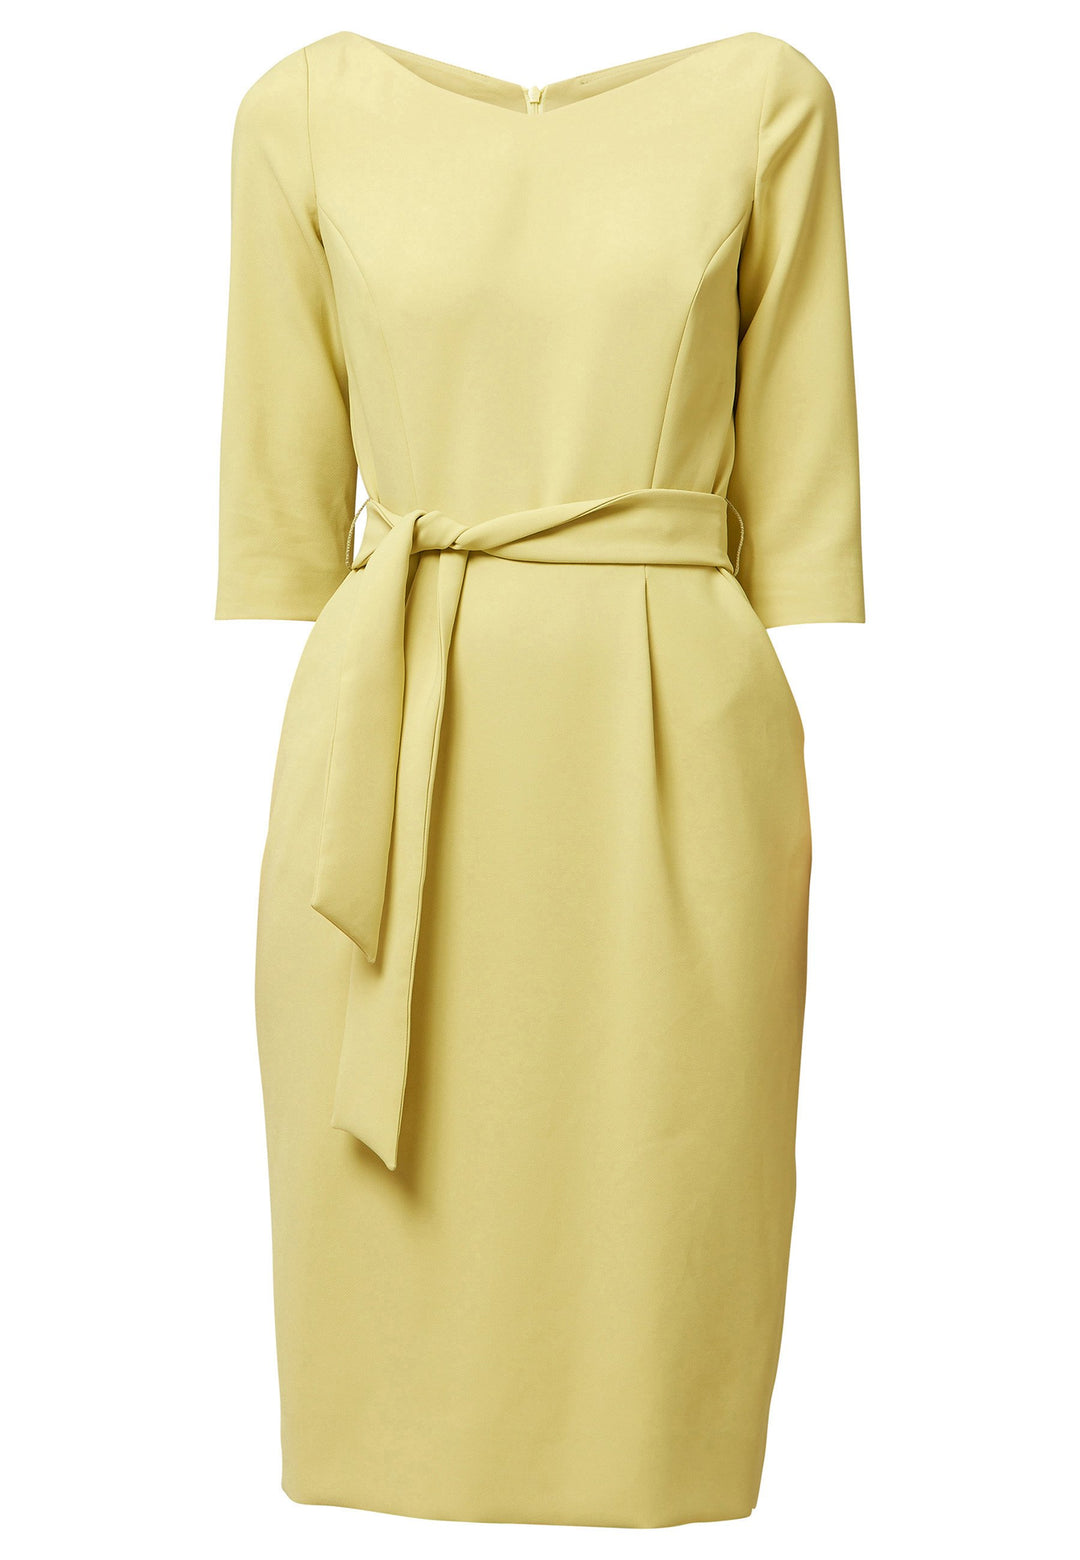 The Clara is a classic silhouette. An expertly tailored form-flattering silhouette with pockets, detachable belt & pencil skirt which falls to mid-calf. Engineered with a sophisticated wide V-neckline. Heighten the drama of this piece with your favourite accessories and heels. Attending a summer wedding? Mother of the bride? Heading to the races? This is the dress for you.